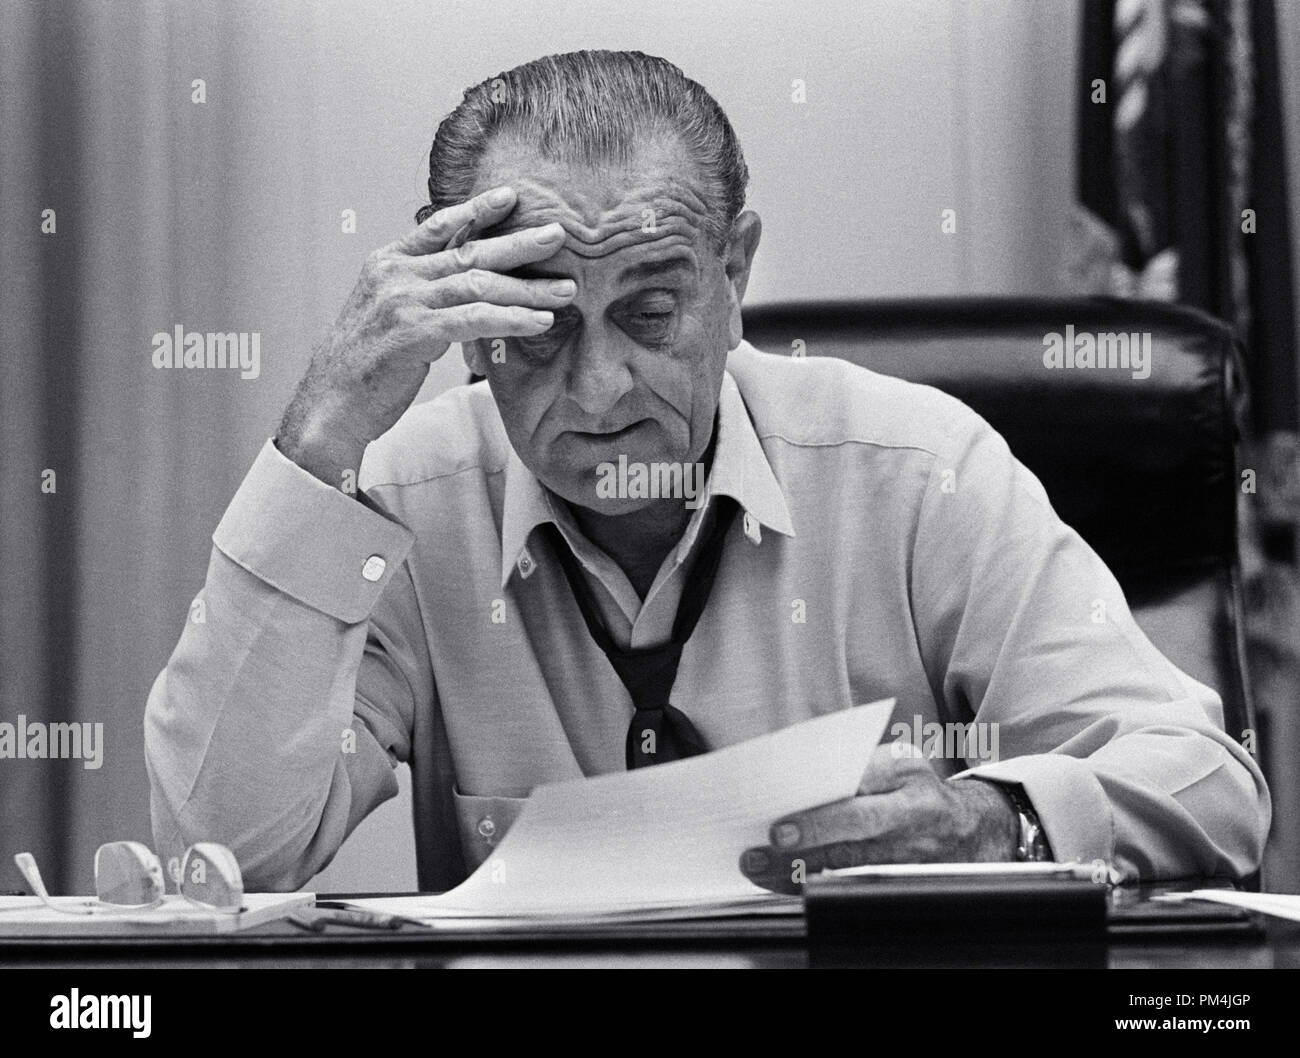 President Lyndon B. Johnson in the Cabinet Room of the White House, preparing an address on Vietnam. October 11, 1968, Washington, DC   File Reference # 1003 755THA Stock Photo